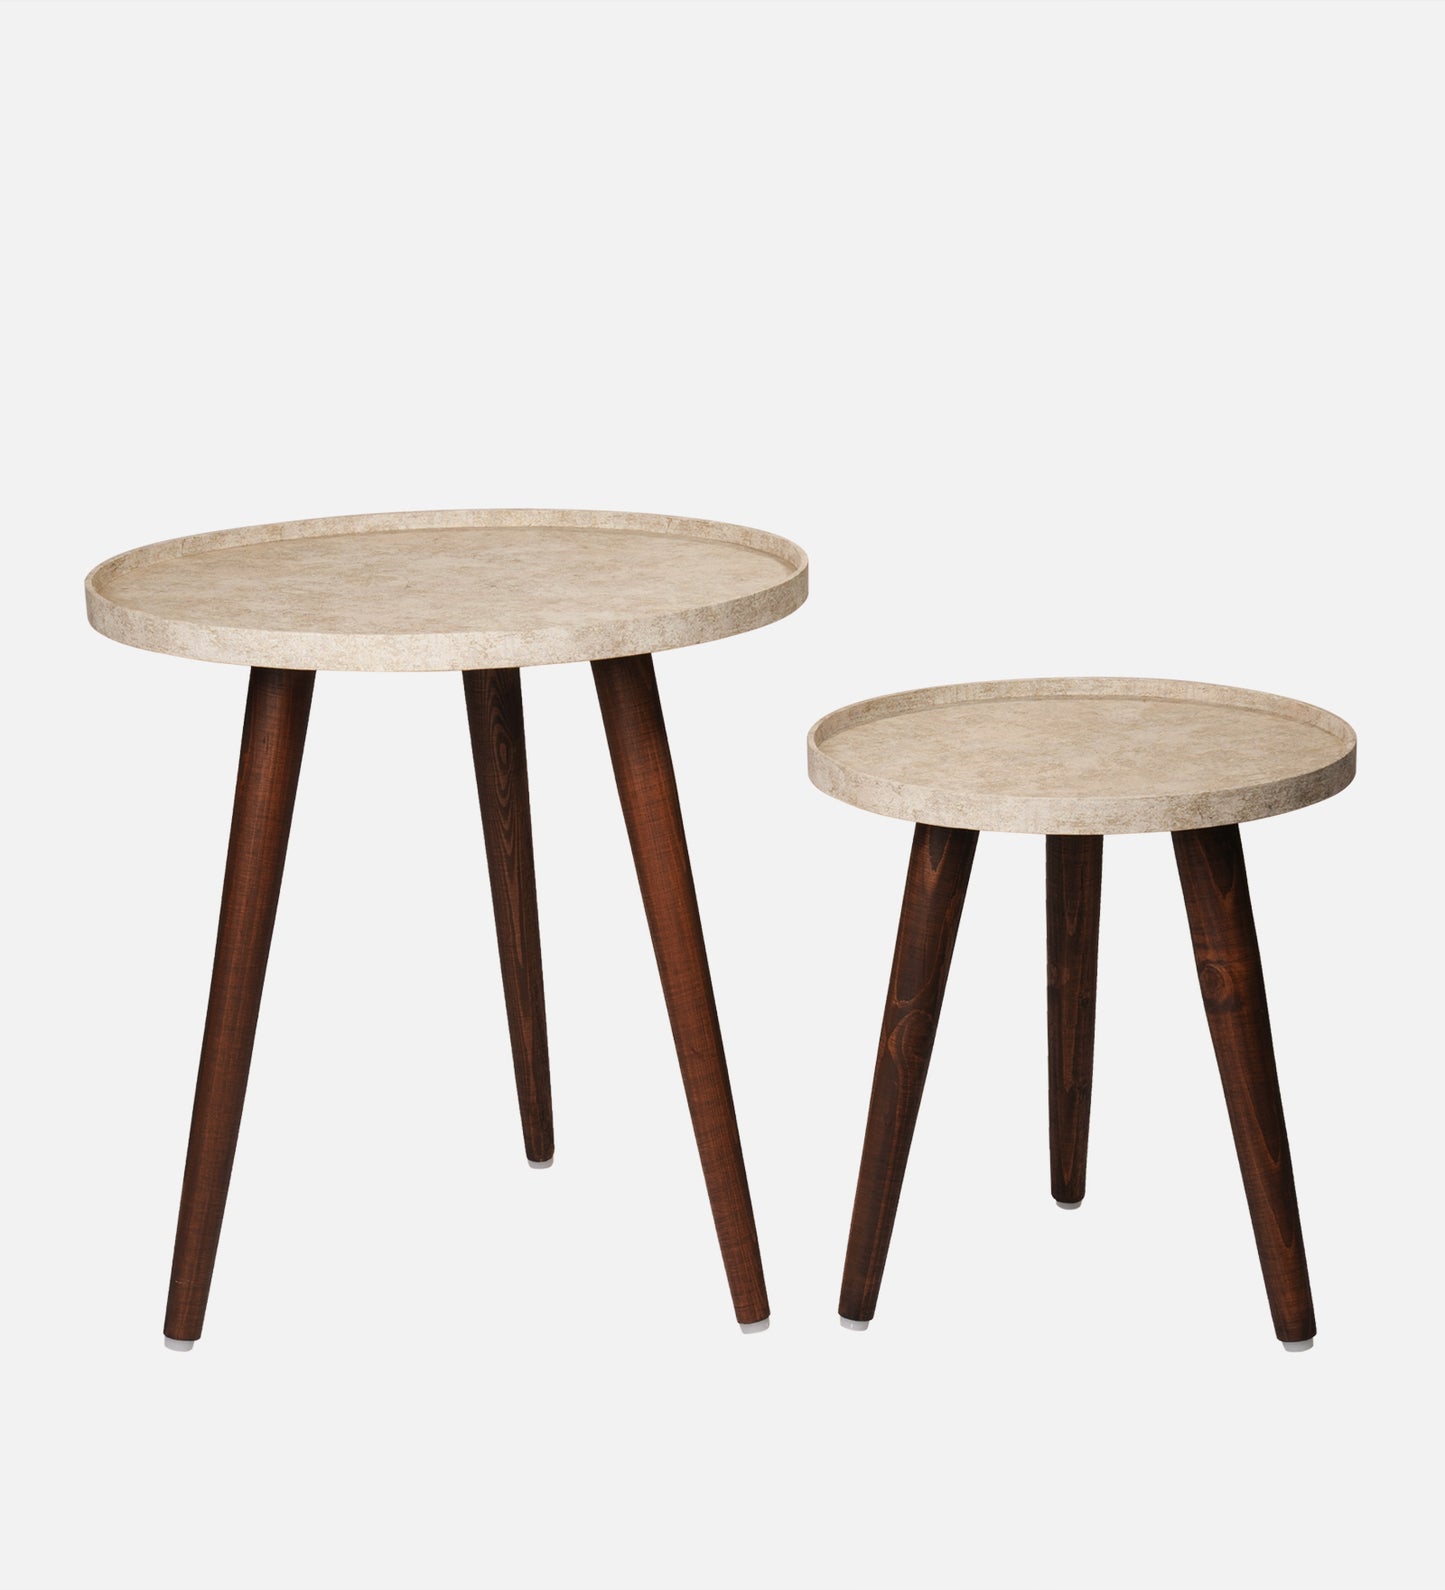 Ethereal Gold Round Nesting Tables with Wooden Legs, Side Tables, Wooden Tables, Living Room Decor by A Tiny Mistake